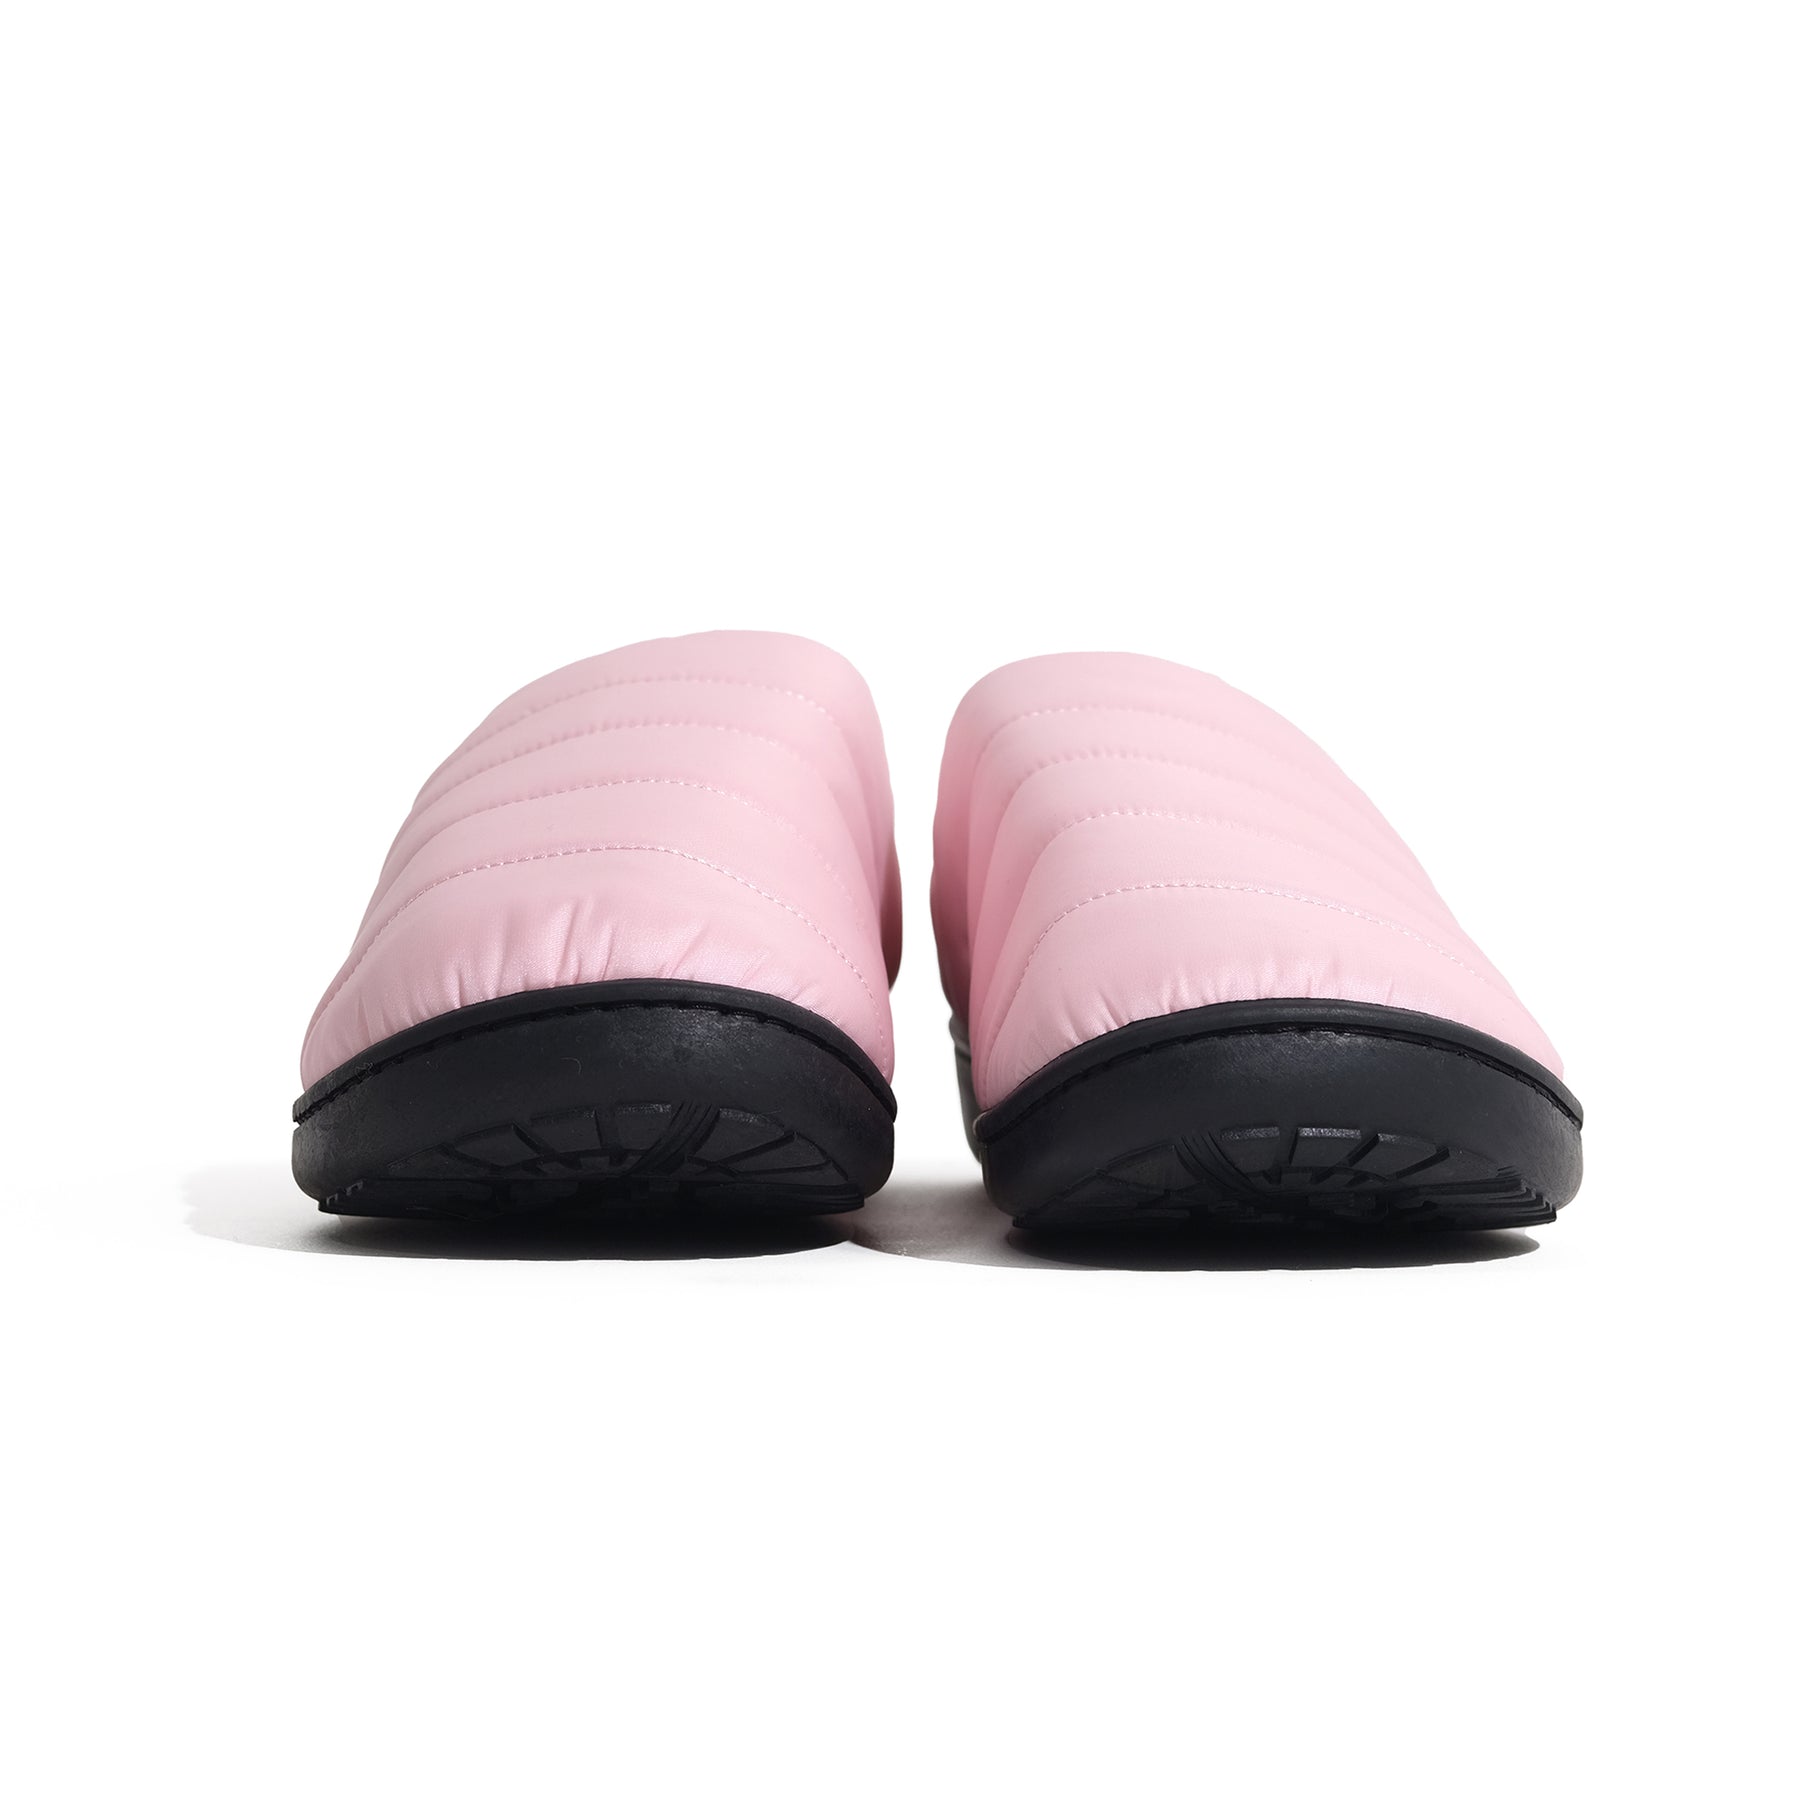 AMEICO - Official US Fall - of SUBU Pink - Distributor & Winter Slippers